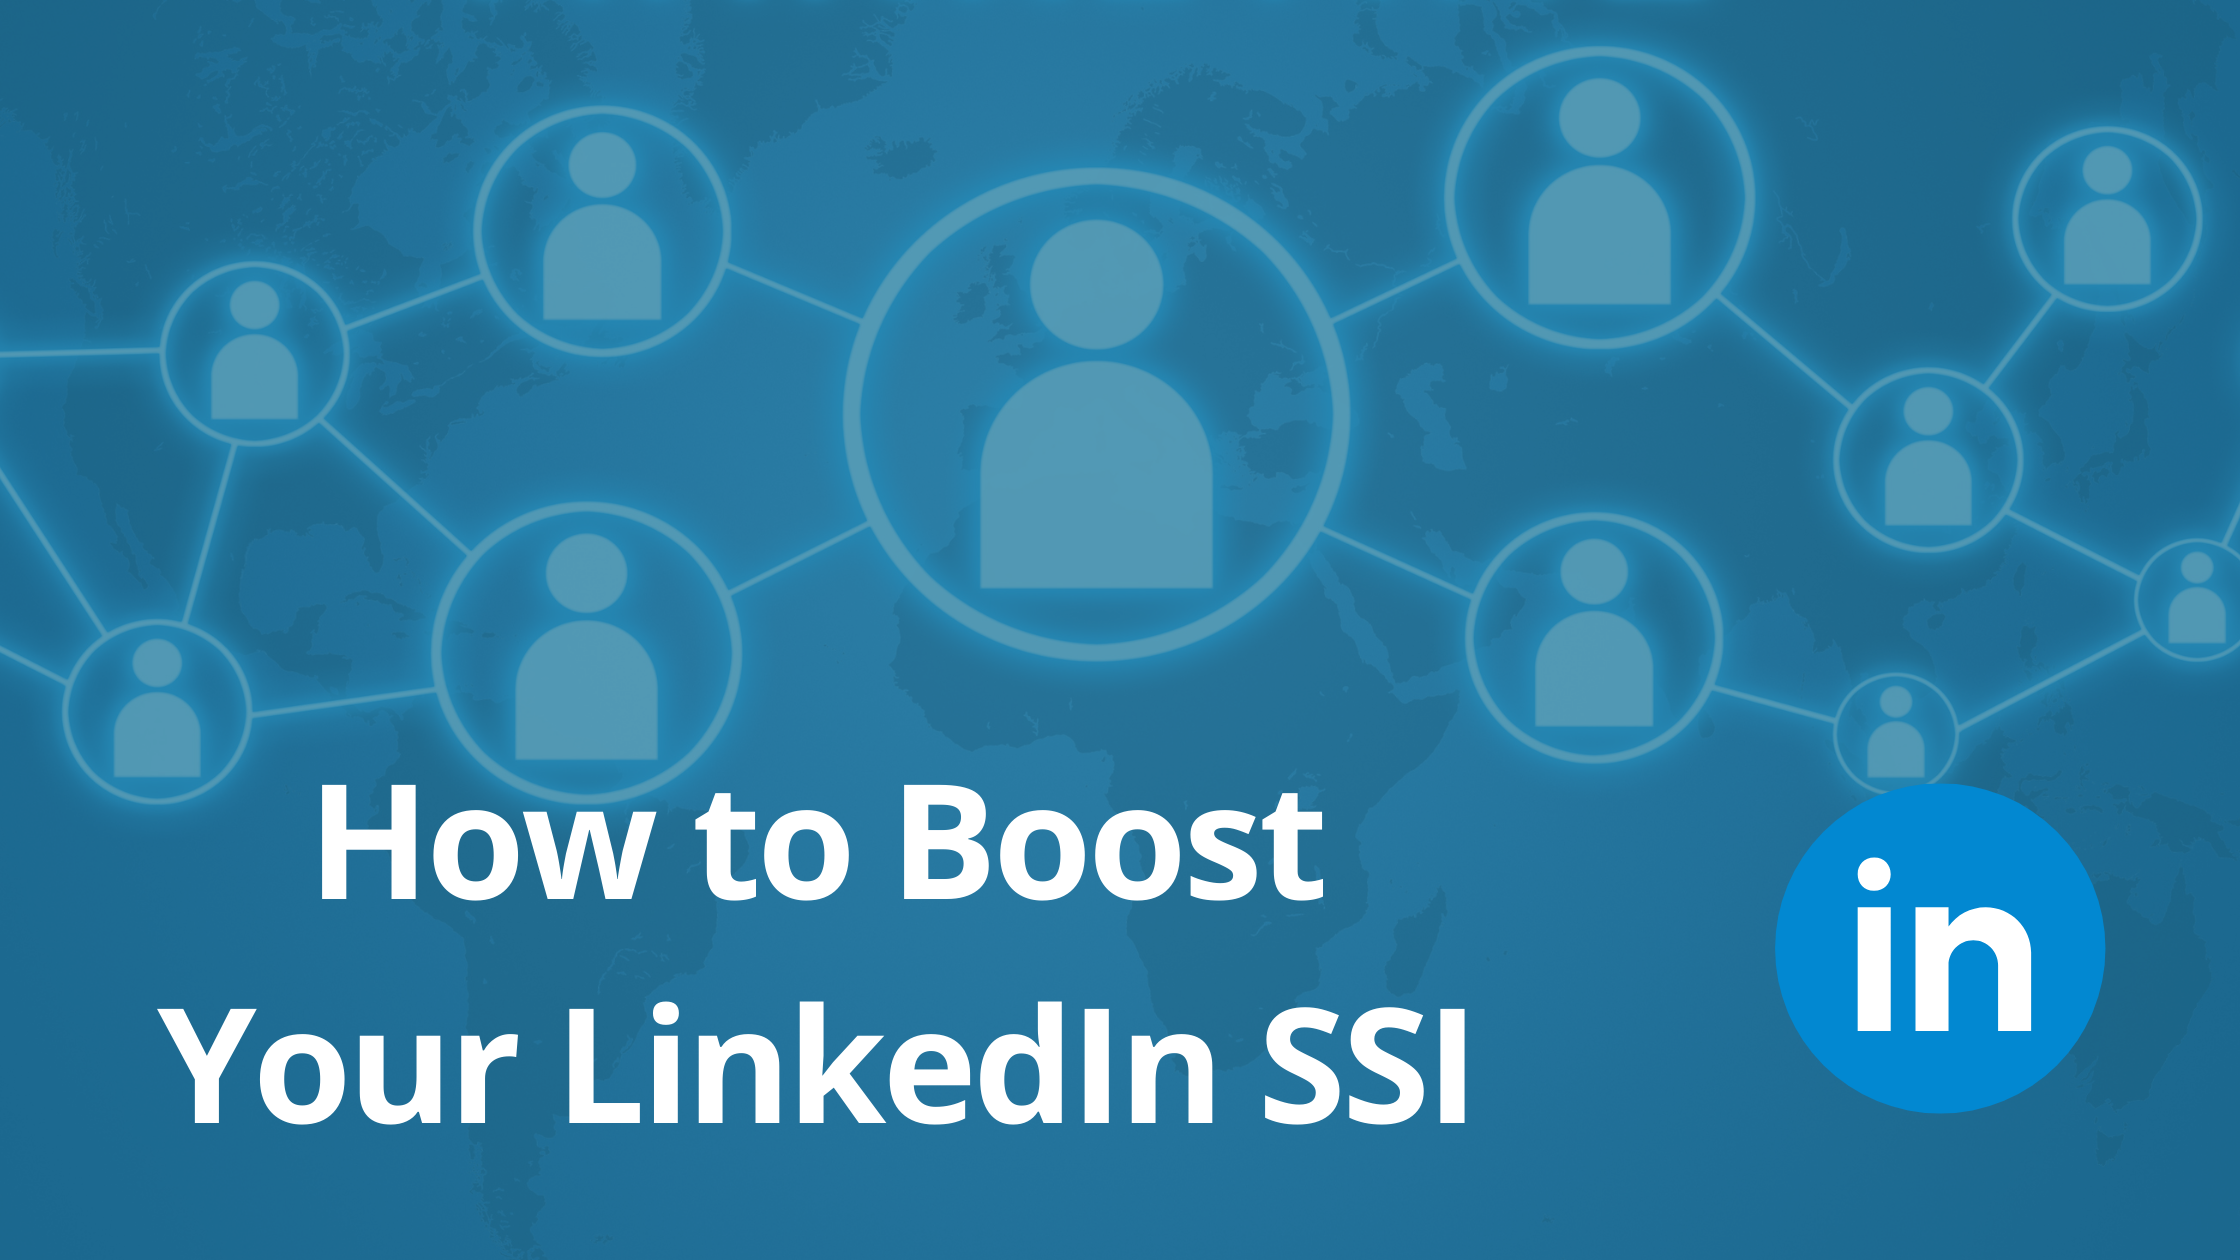 How to Boost Your LinkedIn SSI (Social selling index)